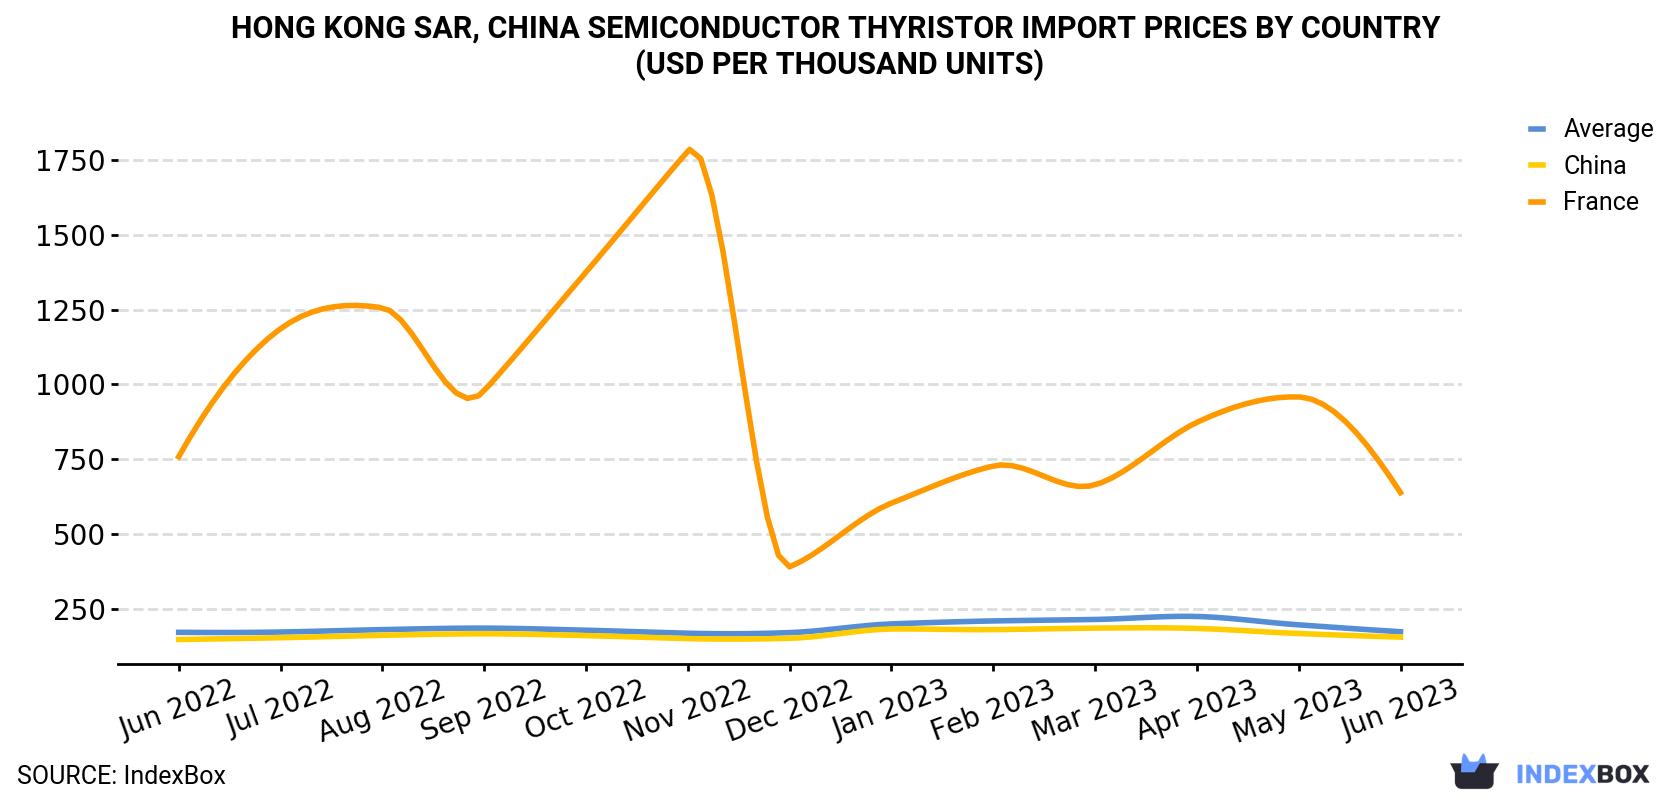 Hong Kong Semiconductor Thyristor Import Prices By Country (USD Per Thousand Units)